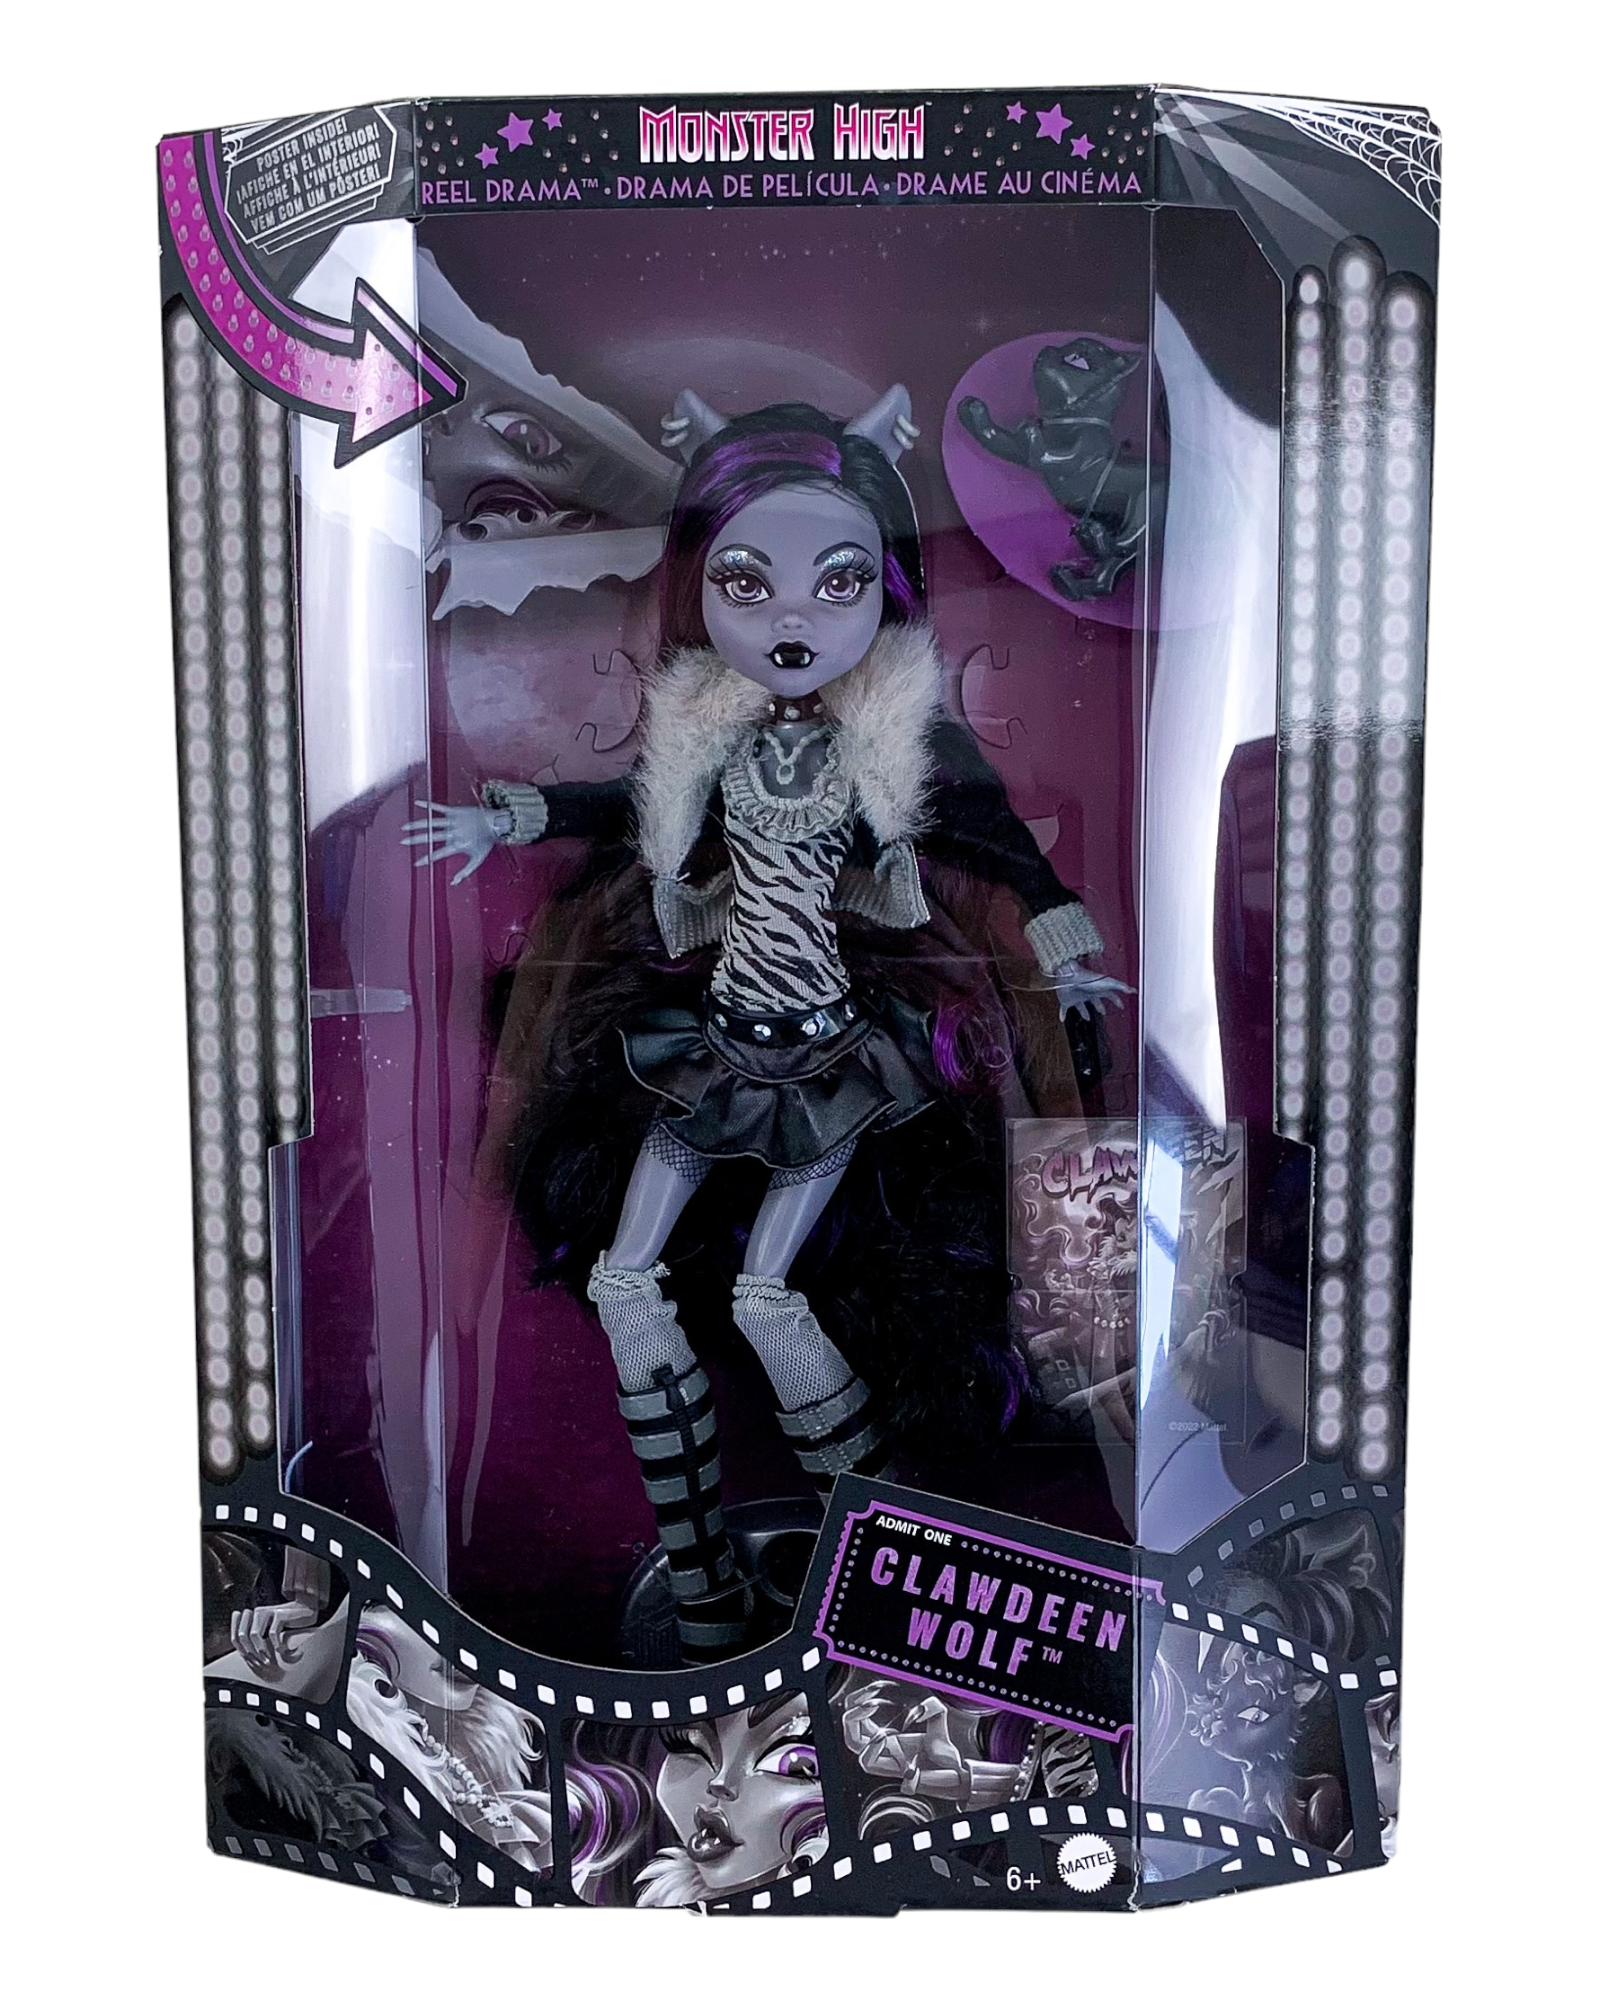  Monster High Doll, Clawdeen Wolf in Black and White, Reel Drama  Collector Doll, Doll-Size and Life-Size Posters, Horror Flick Theme, Toys  and Gifts, Multicolor (HKN28) : Toys & Games